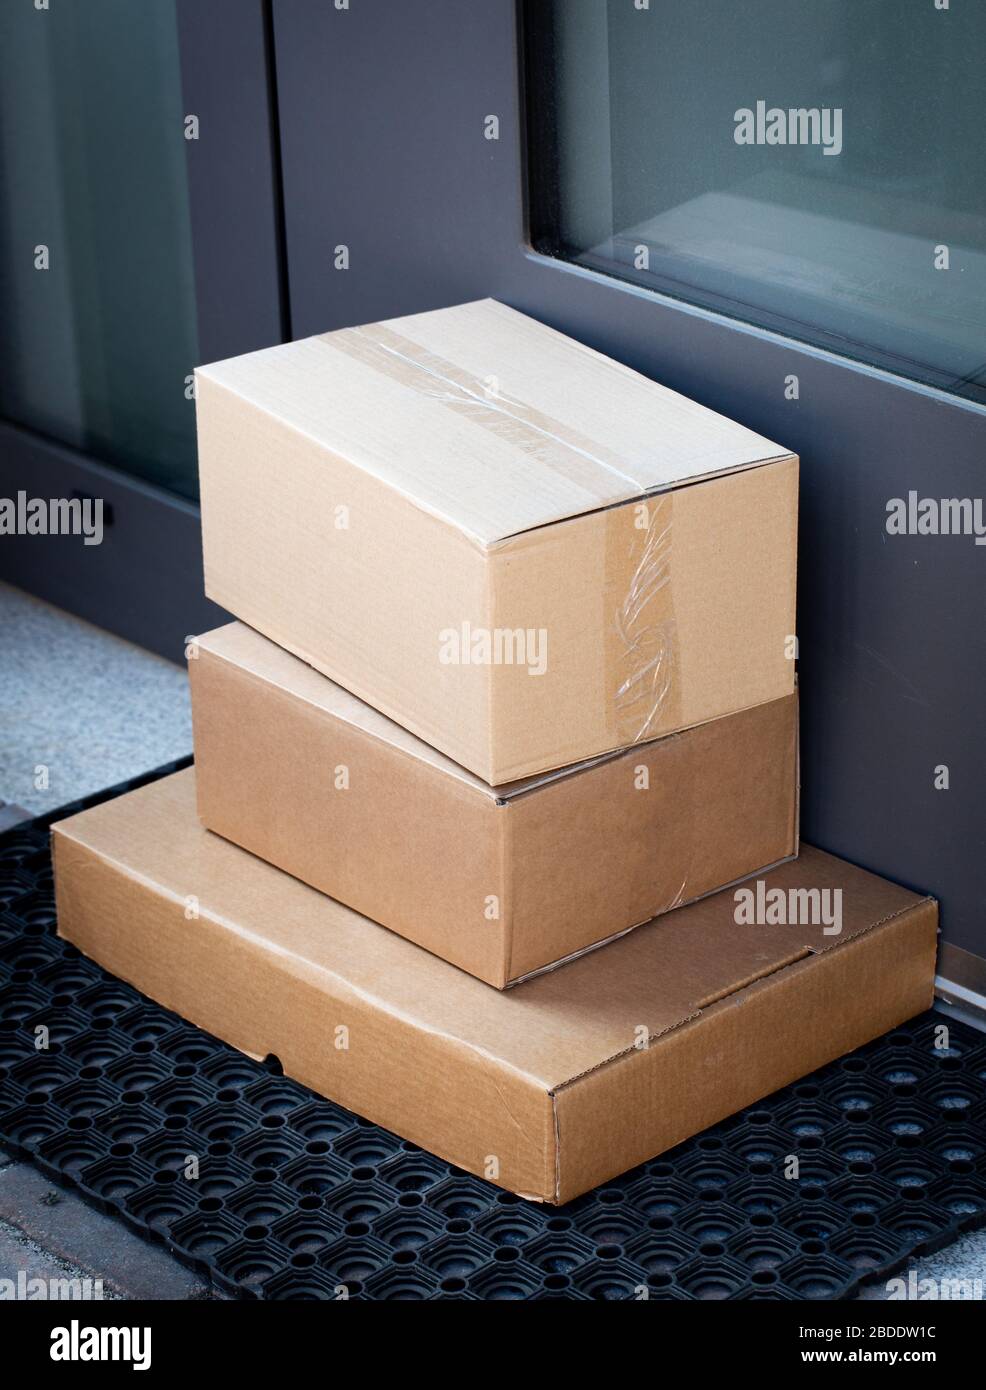 Packages left at front door for contactless delivery of online bought items Stock Photo